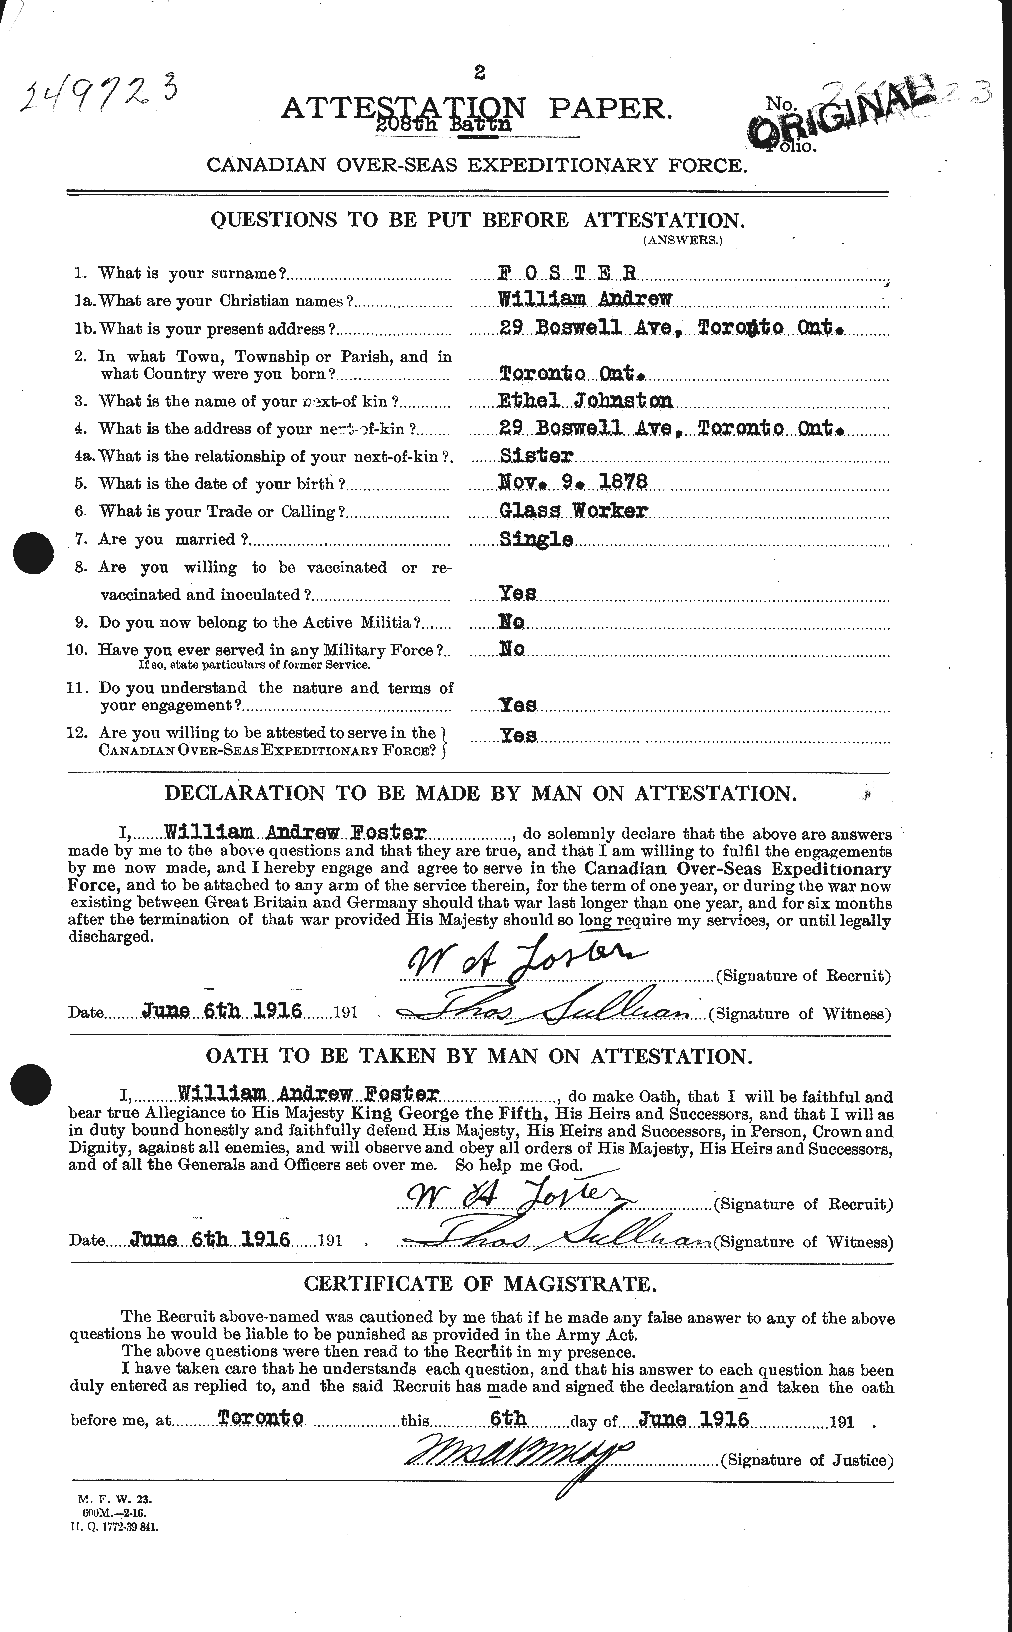 Personnel Records of the First World War - CEF 328728a